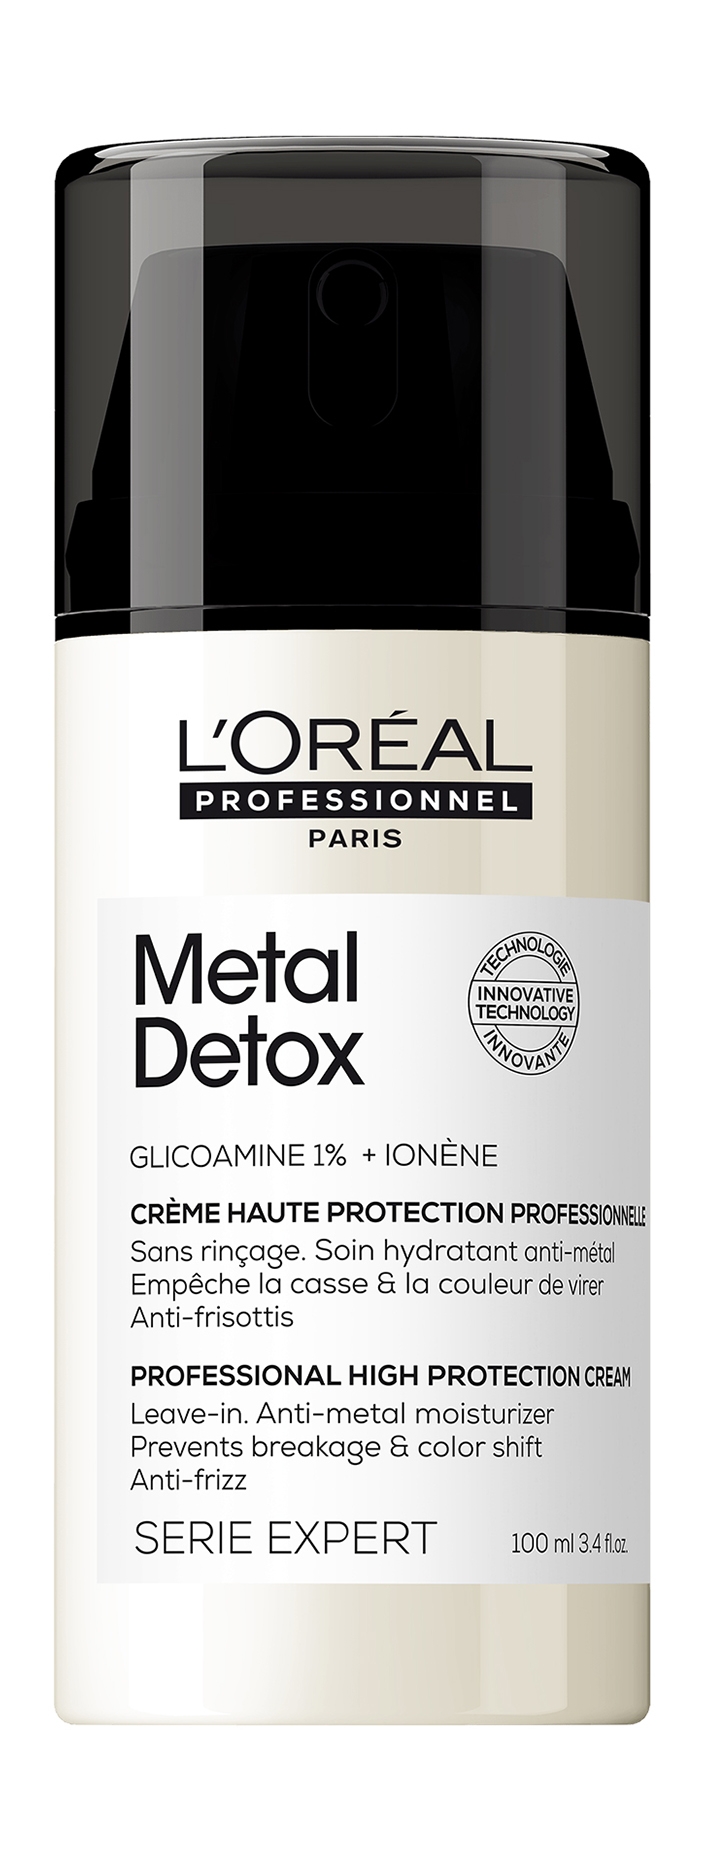 Крем для волос L'Oreal Professionnel Serie Expert Metal Detox High Protection Cream, 100мл 500 1000g high purity copper particles electrolytic copper particles single crystal metal copper particles copper blocks copper